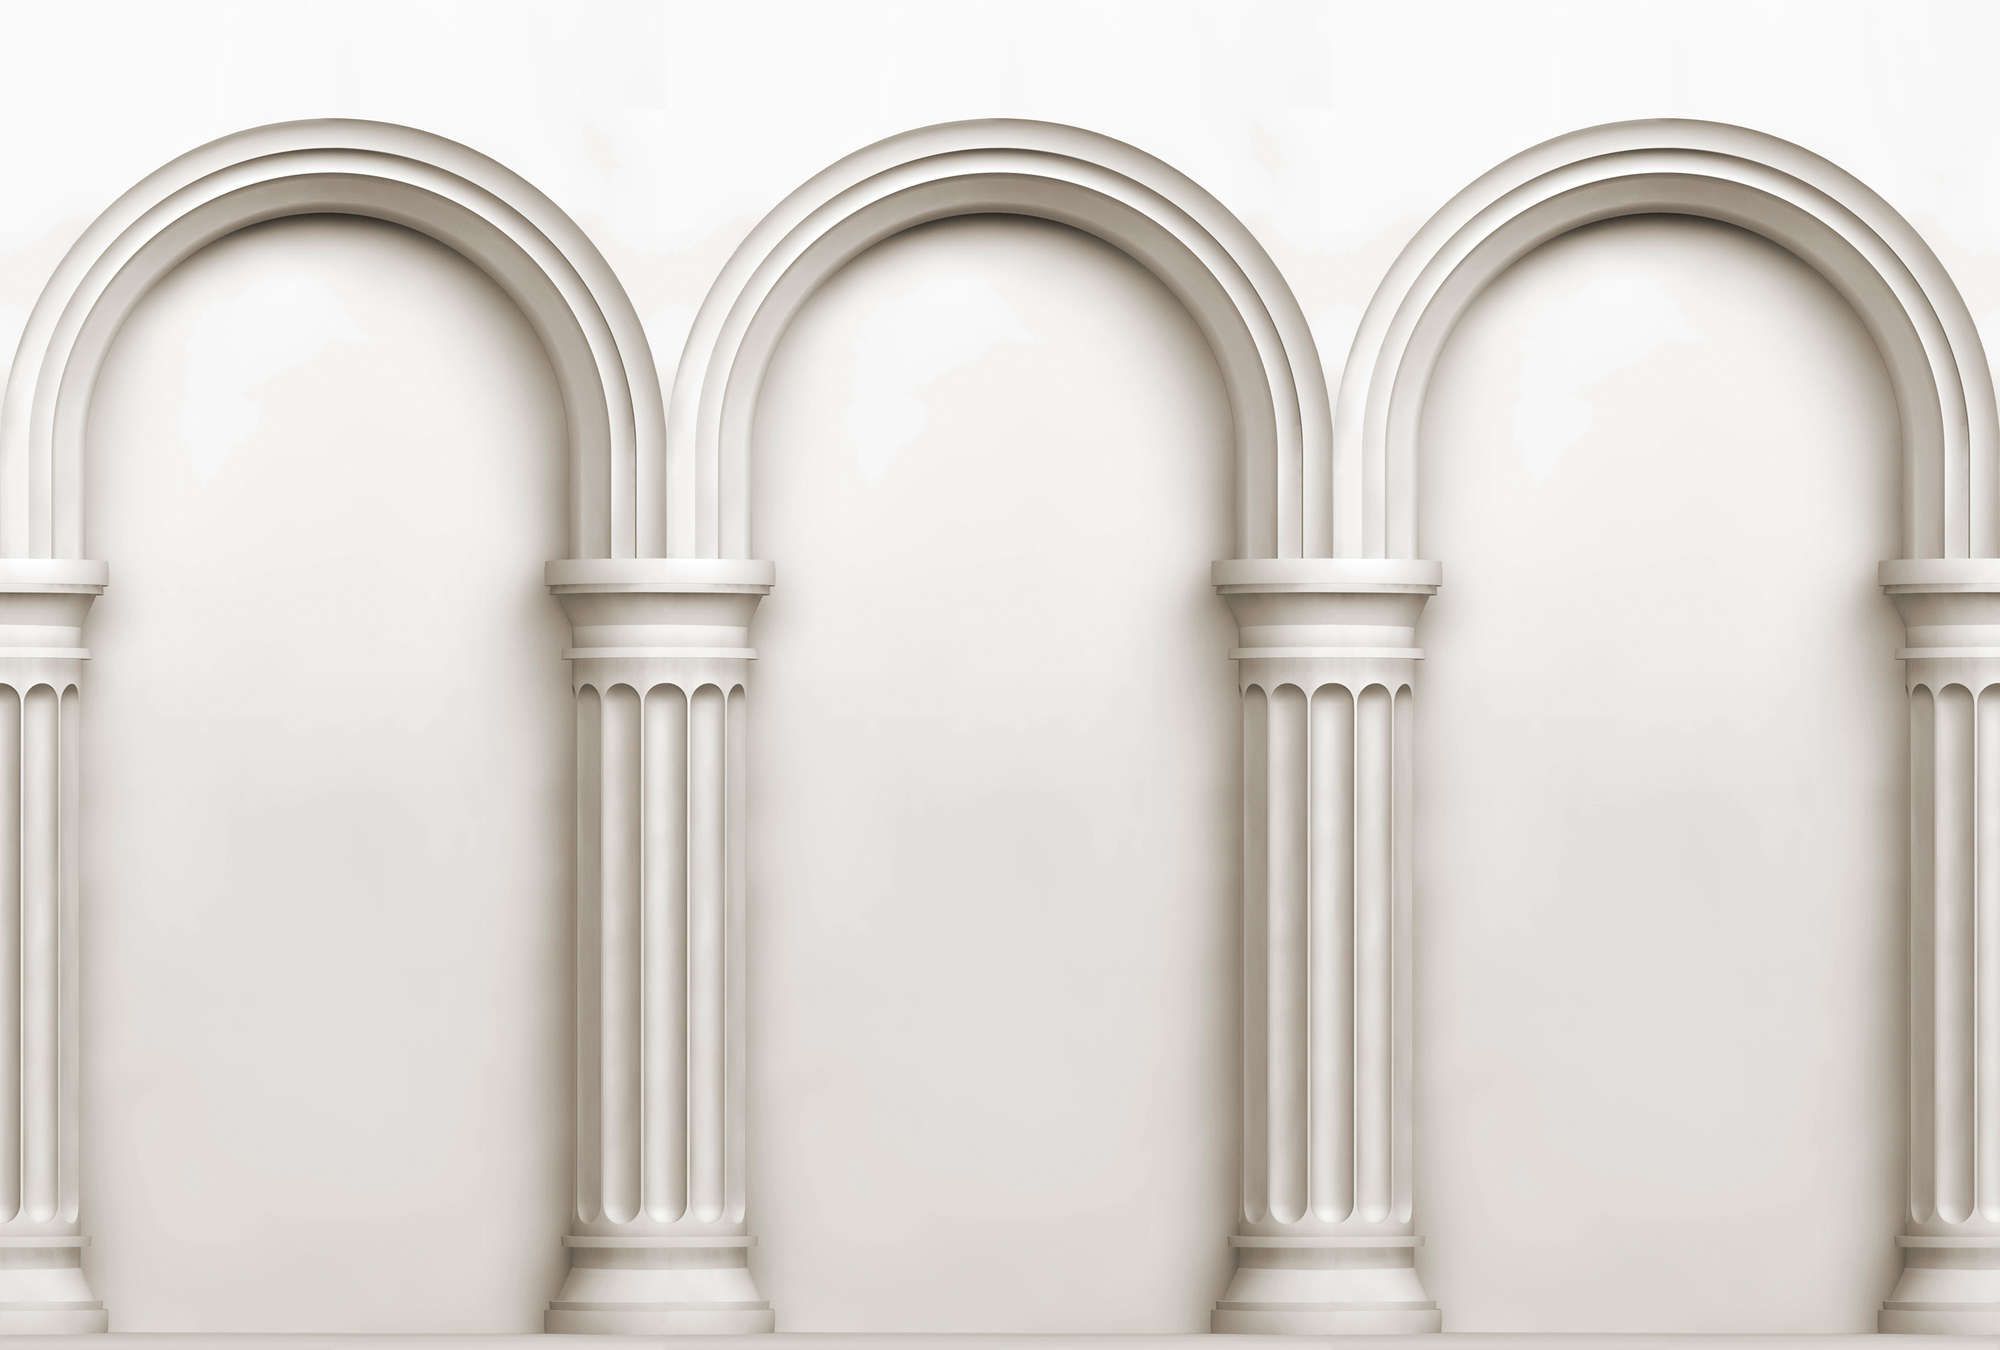             Photo wallpaper »new roman« - Architecture with round arches - Lightly textured non-woven fabric
        